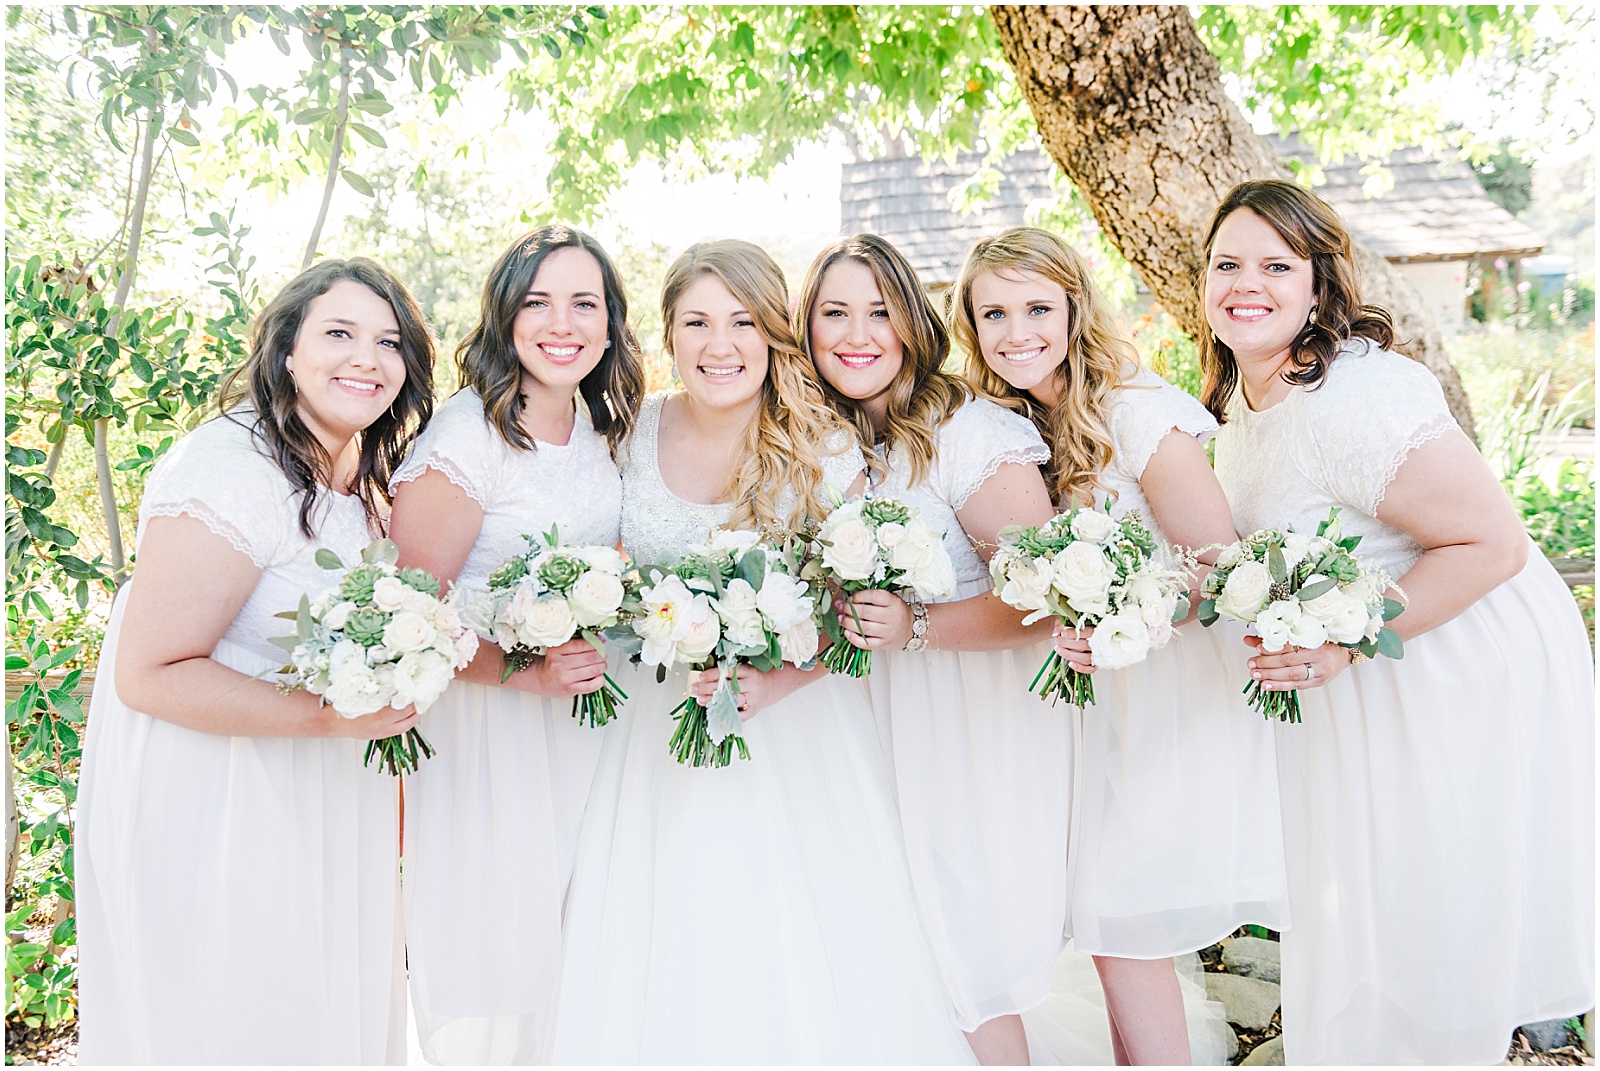 Serra Plaza Wedding by Mollie Jane Photography.  To see more go to www.molliejanephotography.com